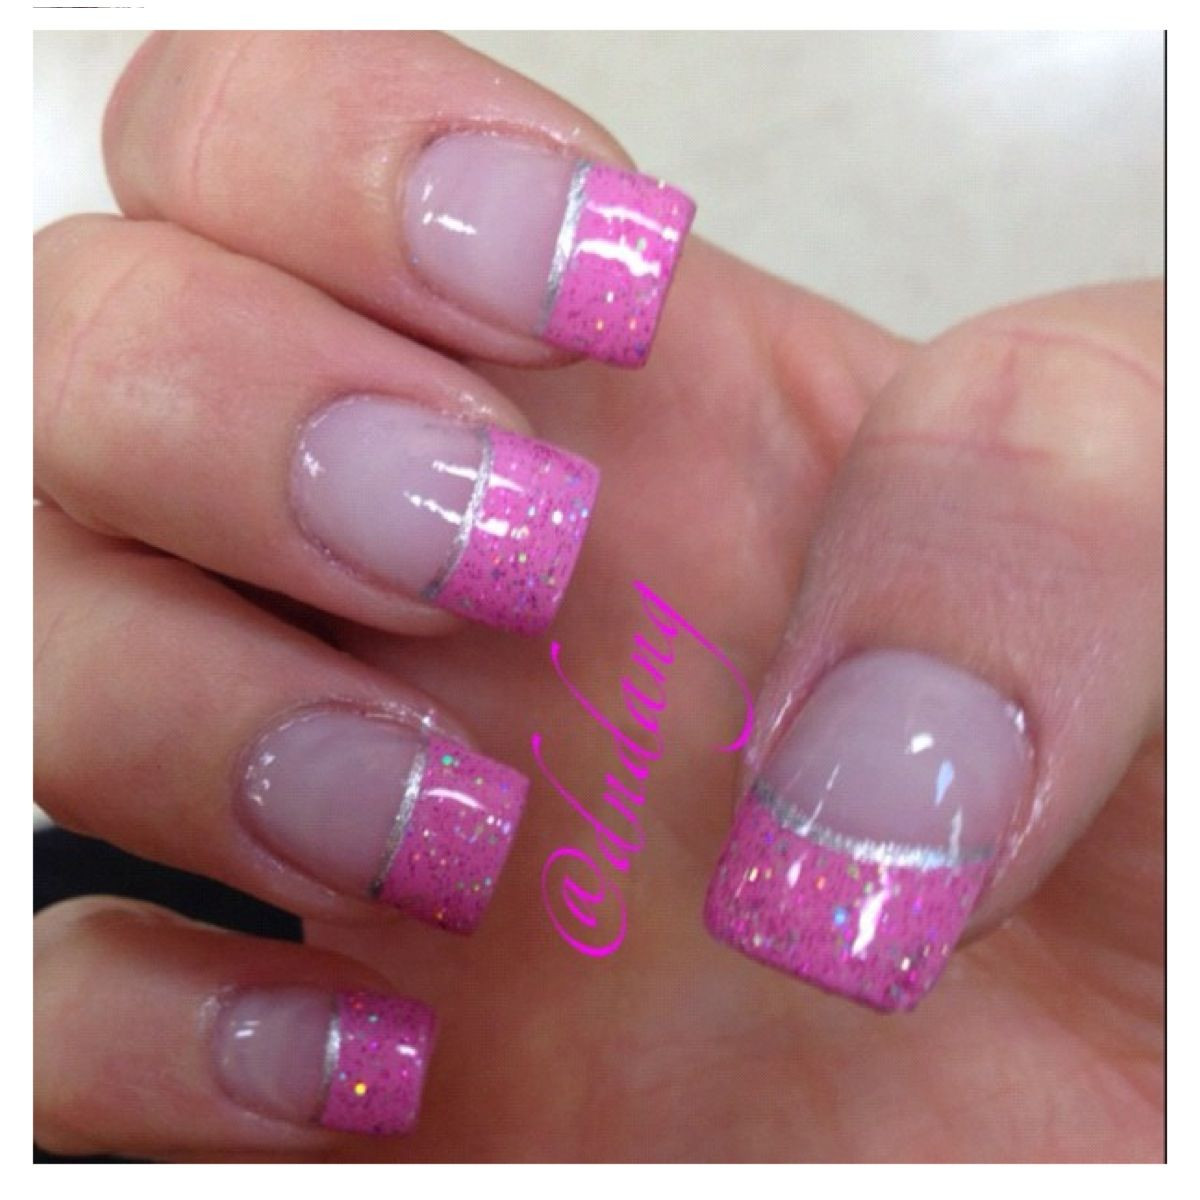 Pink Nails With Glitter Tips
 Pink and glitter French tip